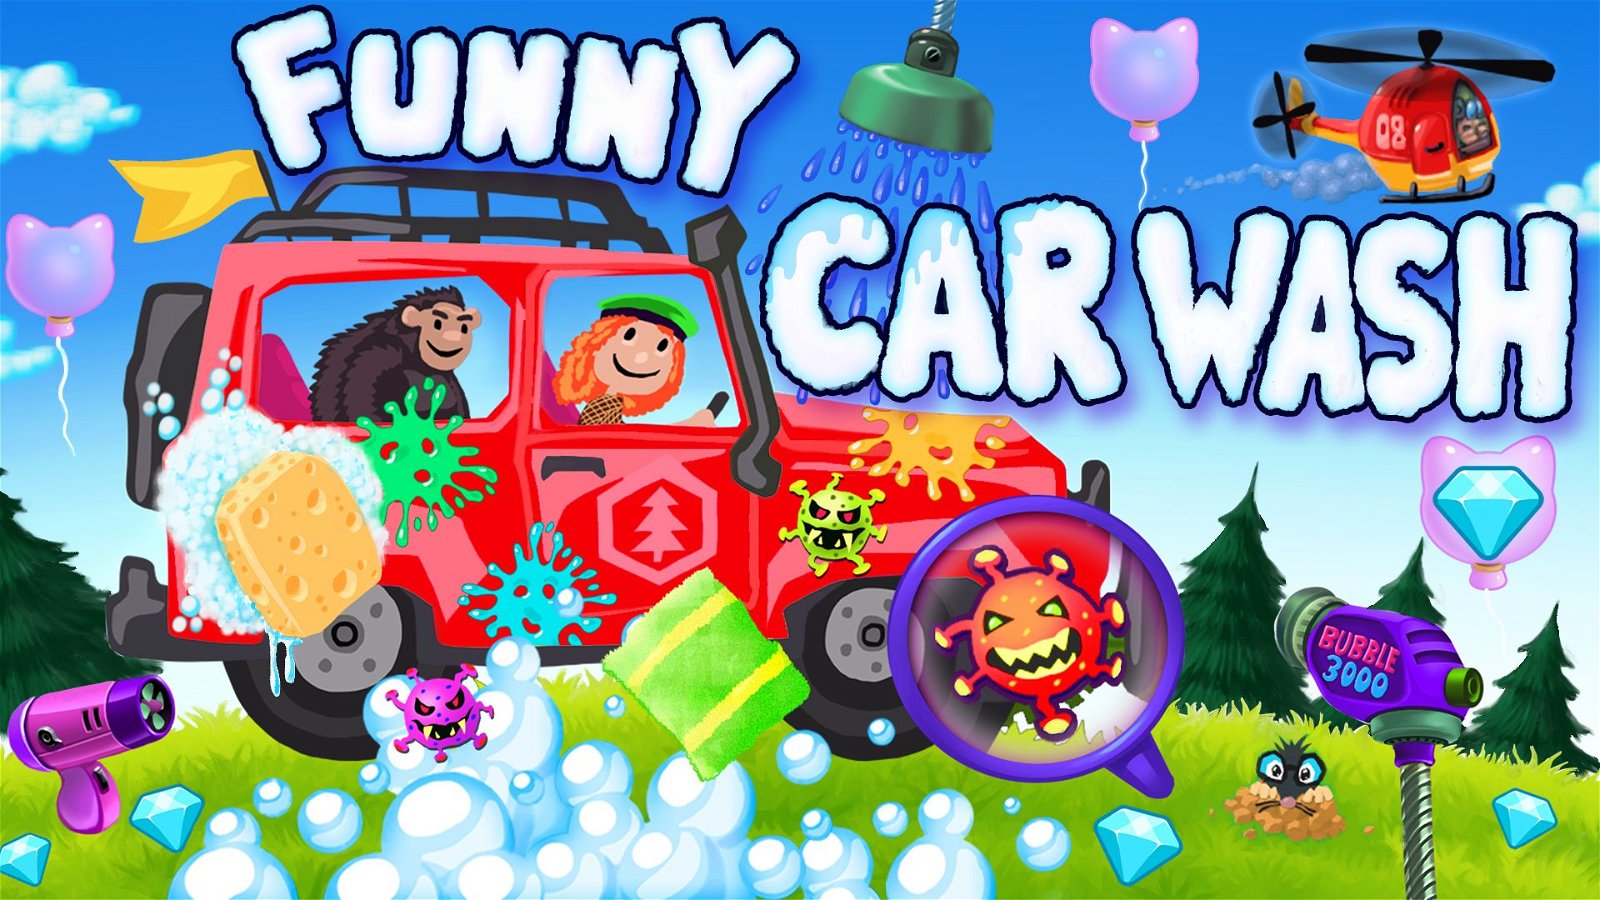 Image of Funny Car Wash - Trucks & Cars Game Garage for Kids & Toddlers